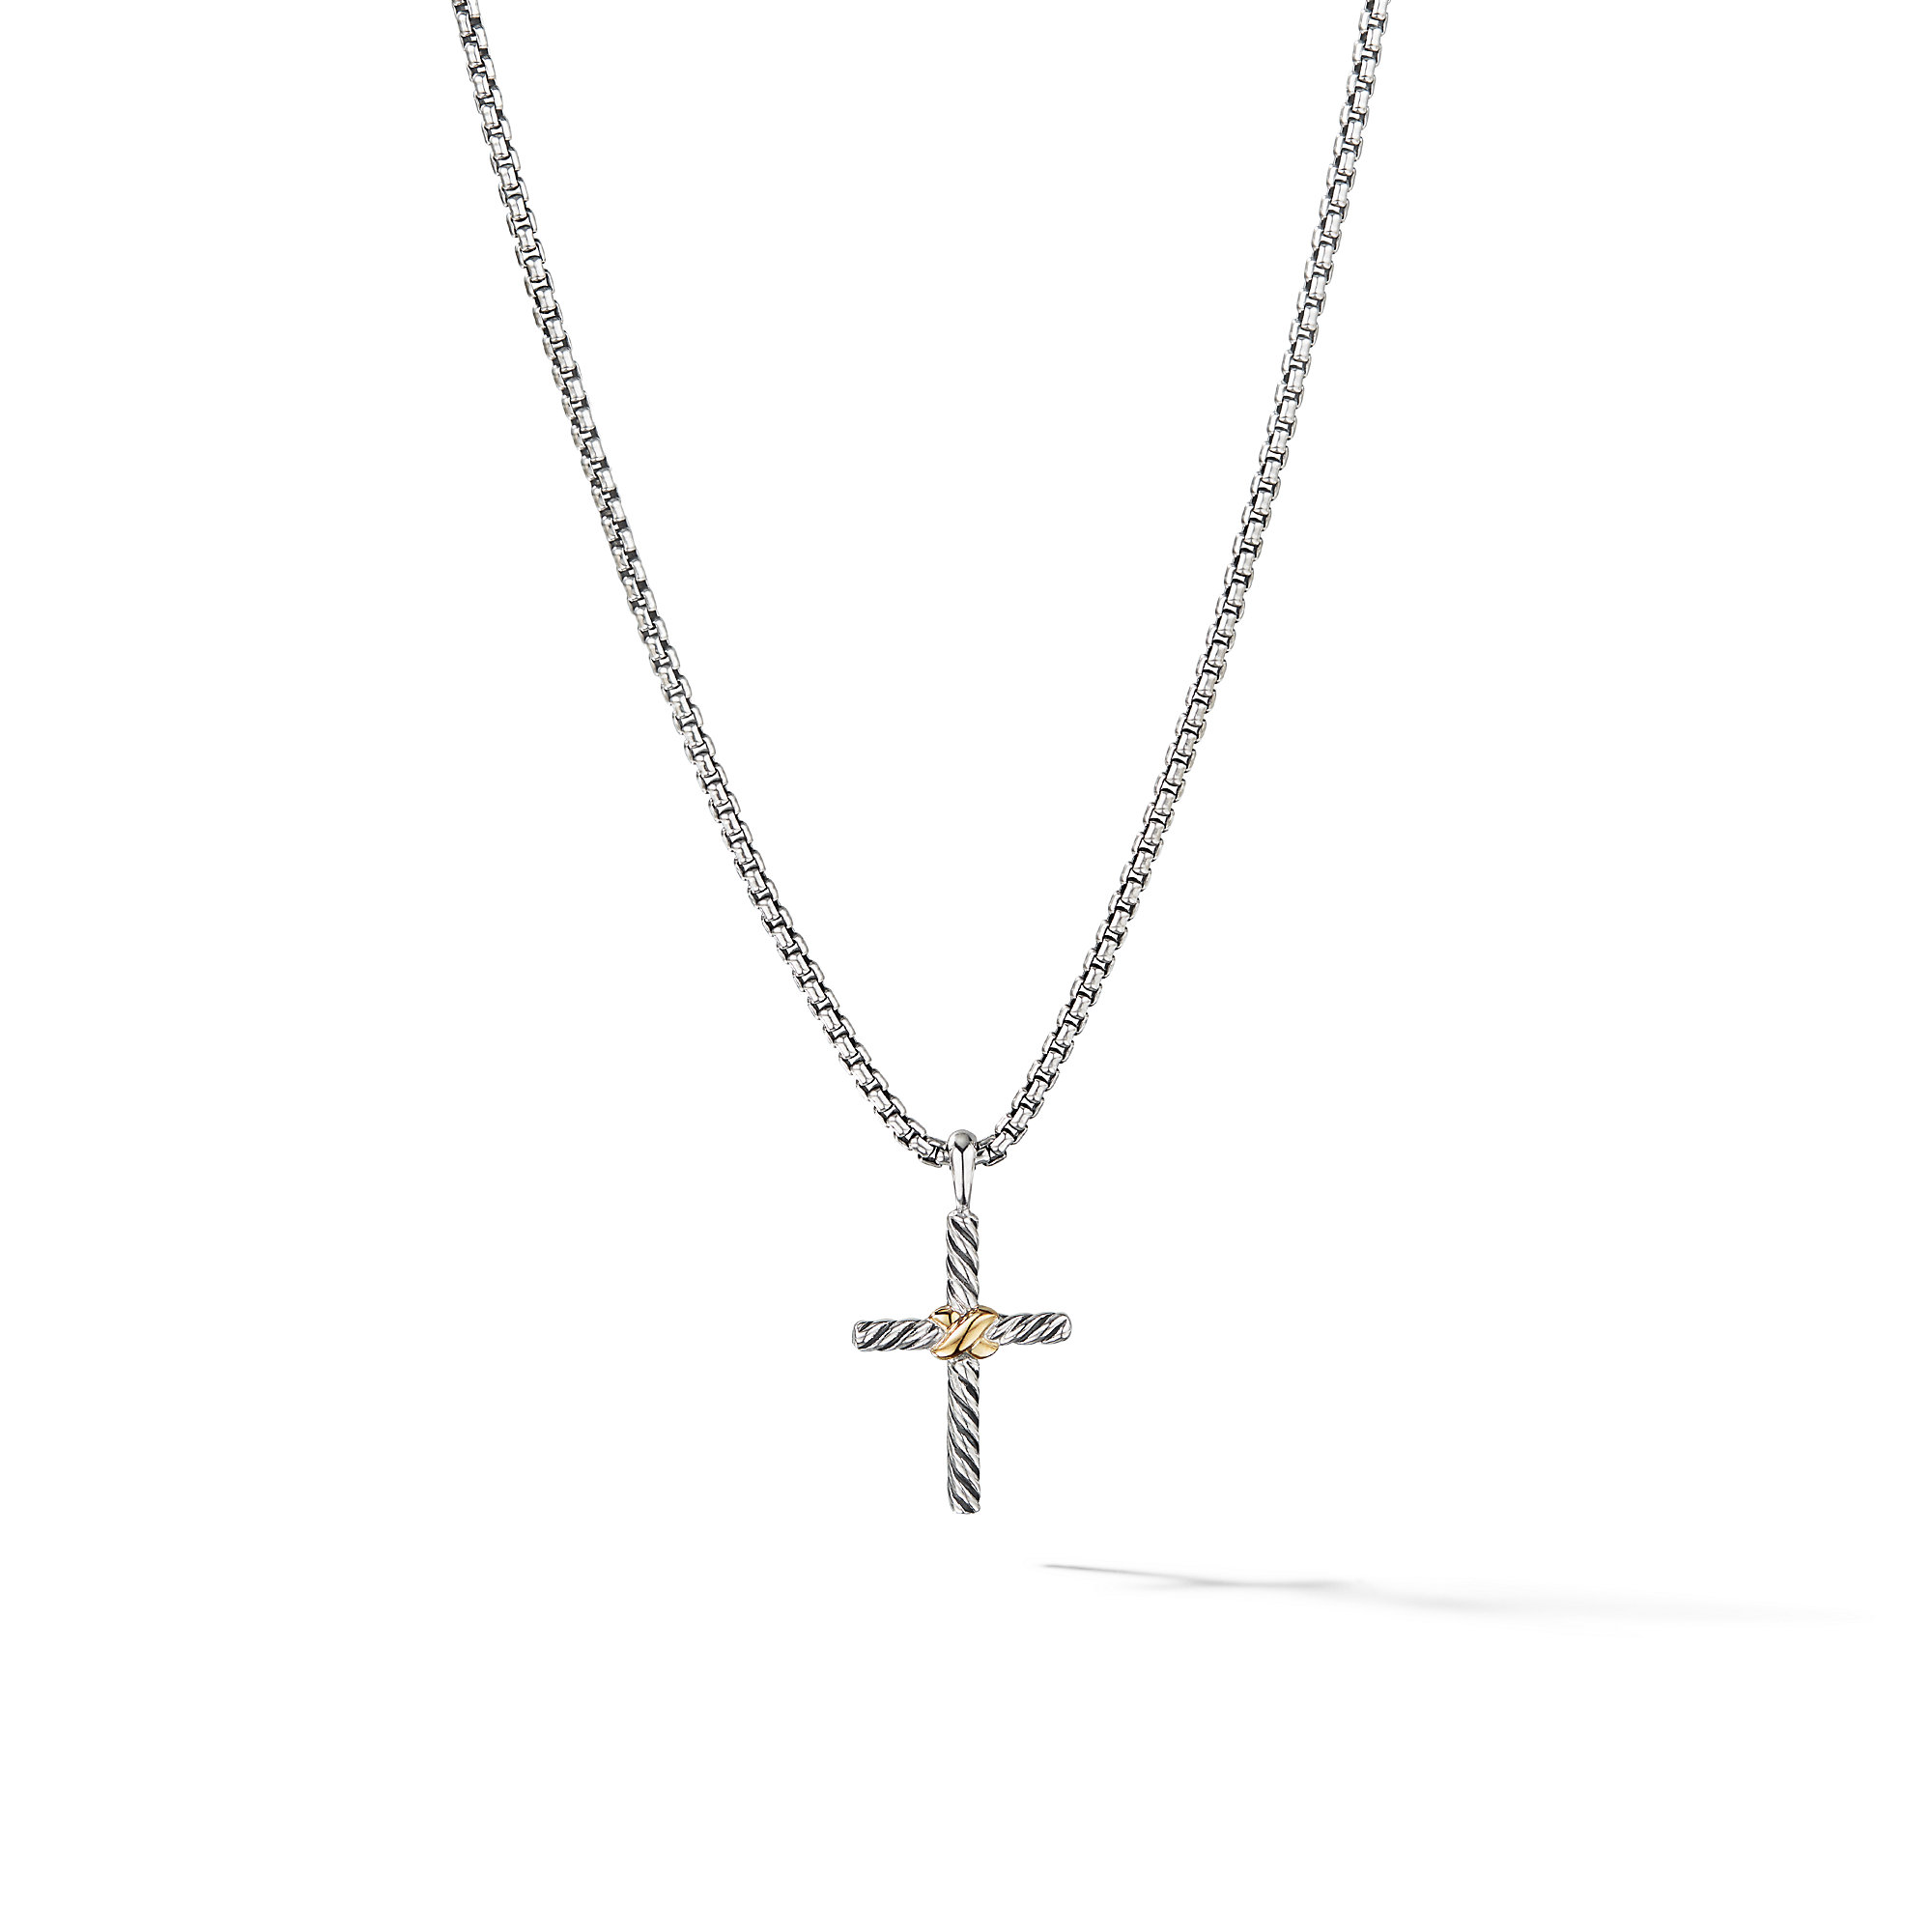 Petite X Cross Necklace in Sterling Silver with 14K Yellow Gold, 24mm